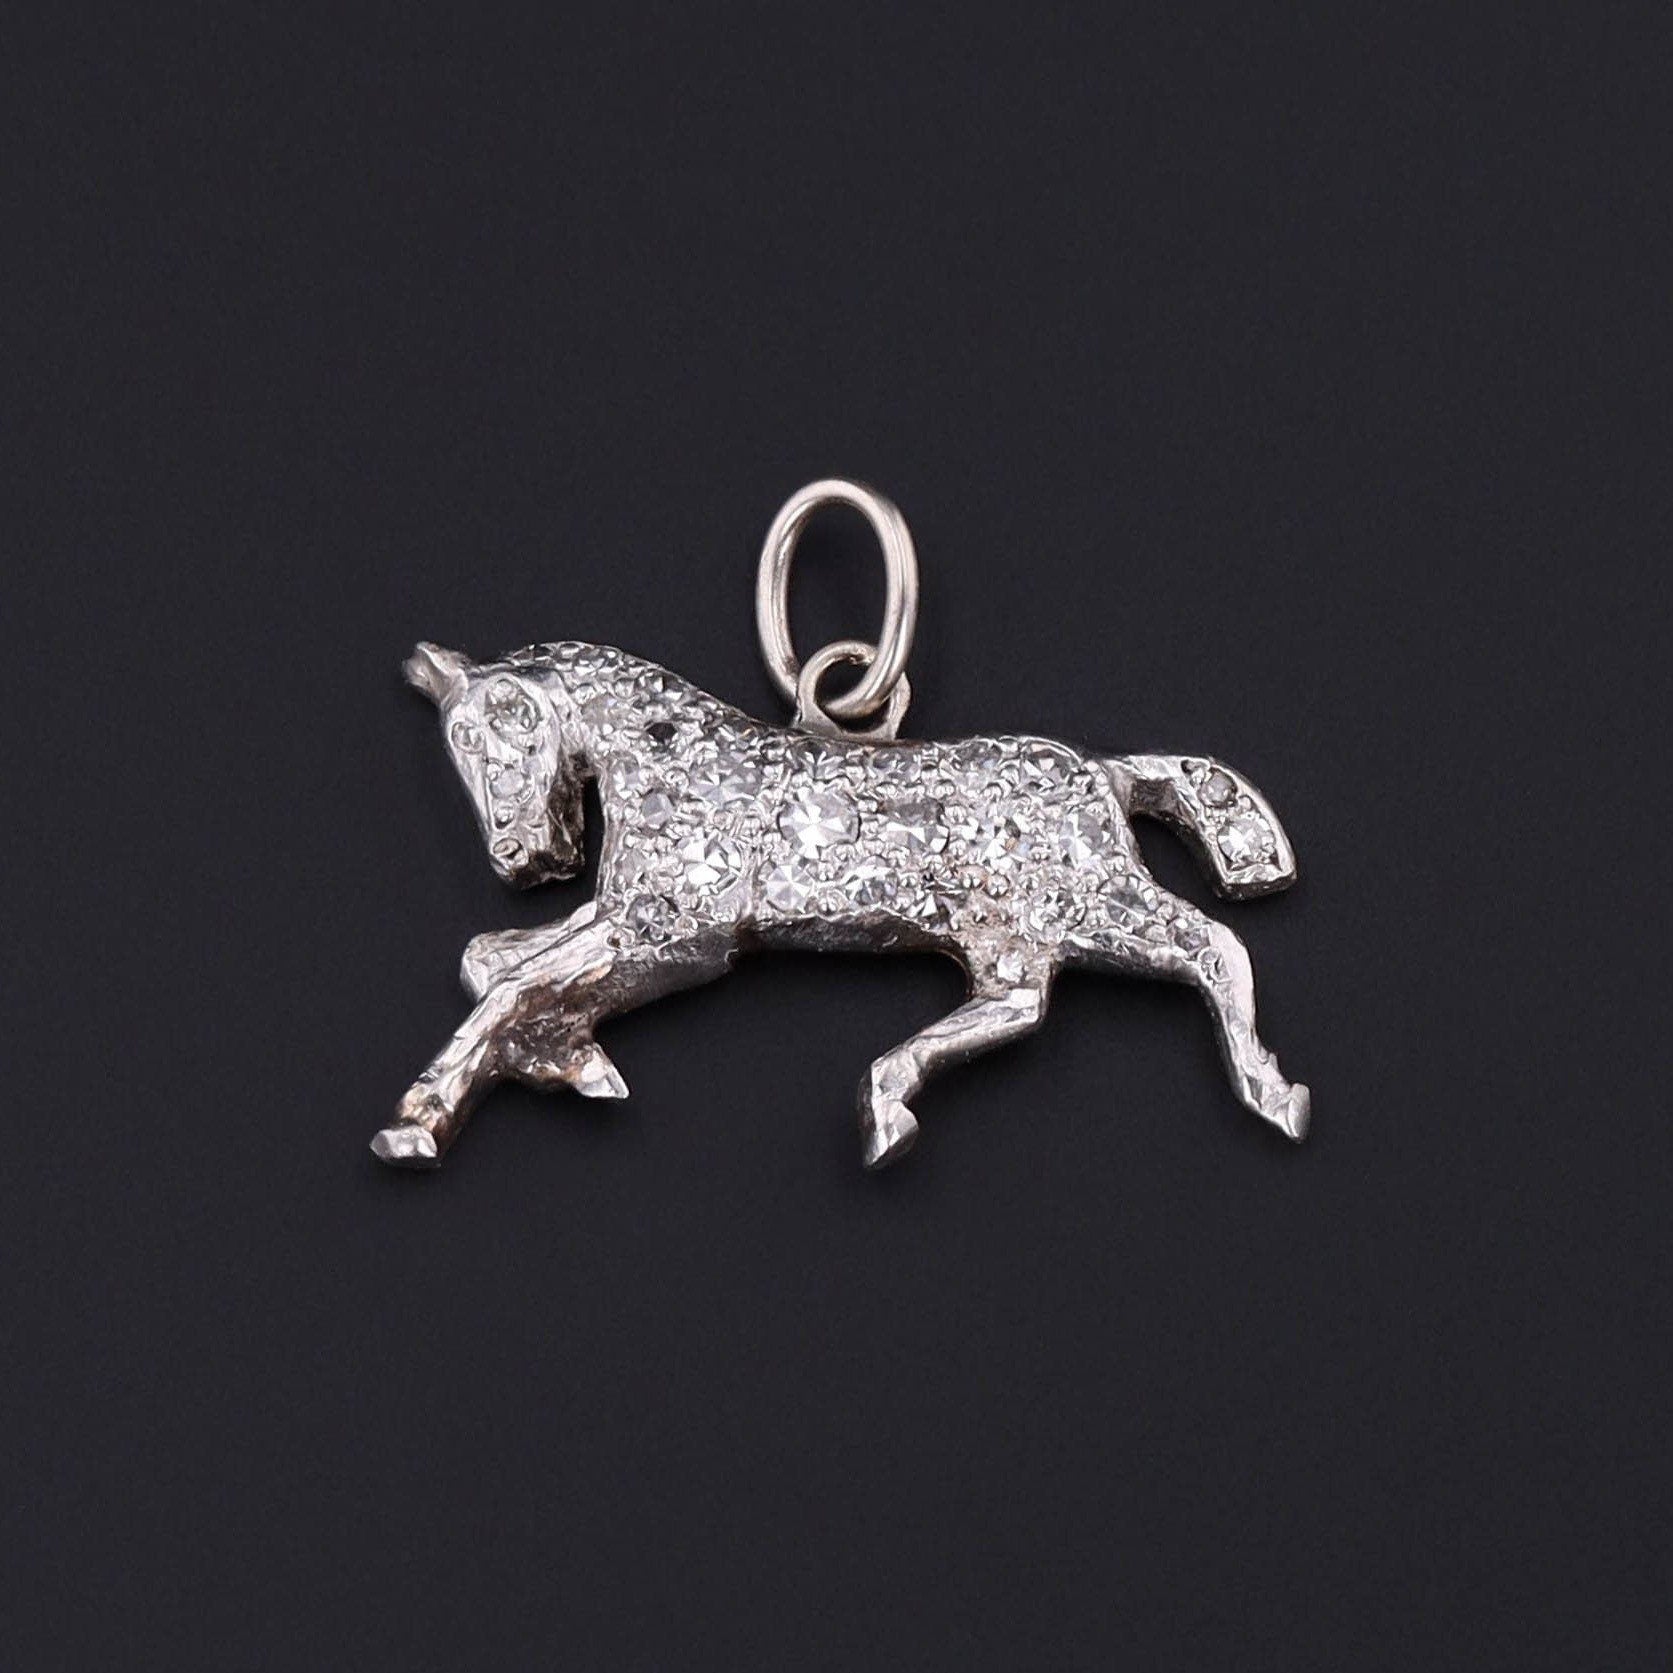 Vintage Art Deco Platinum and Diamond Horse Charm Perfect for an Equestrian or Horse Lover